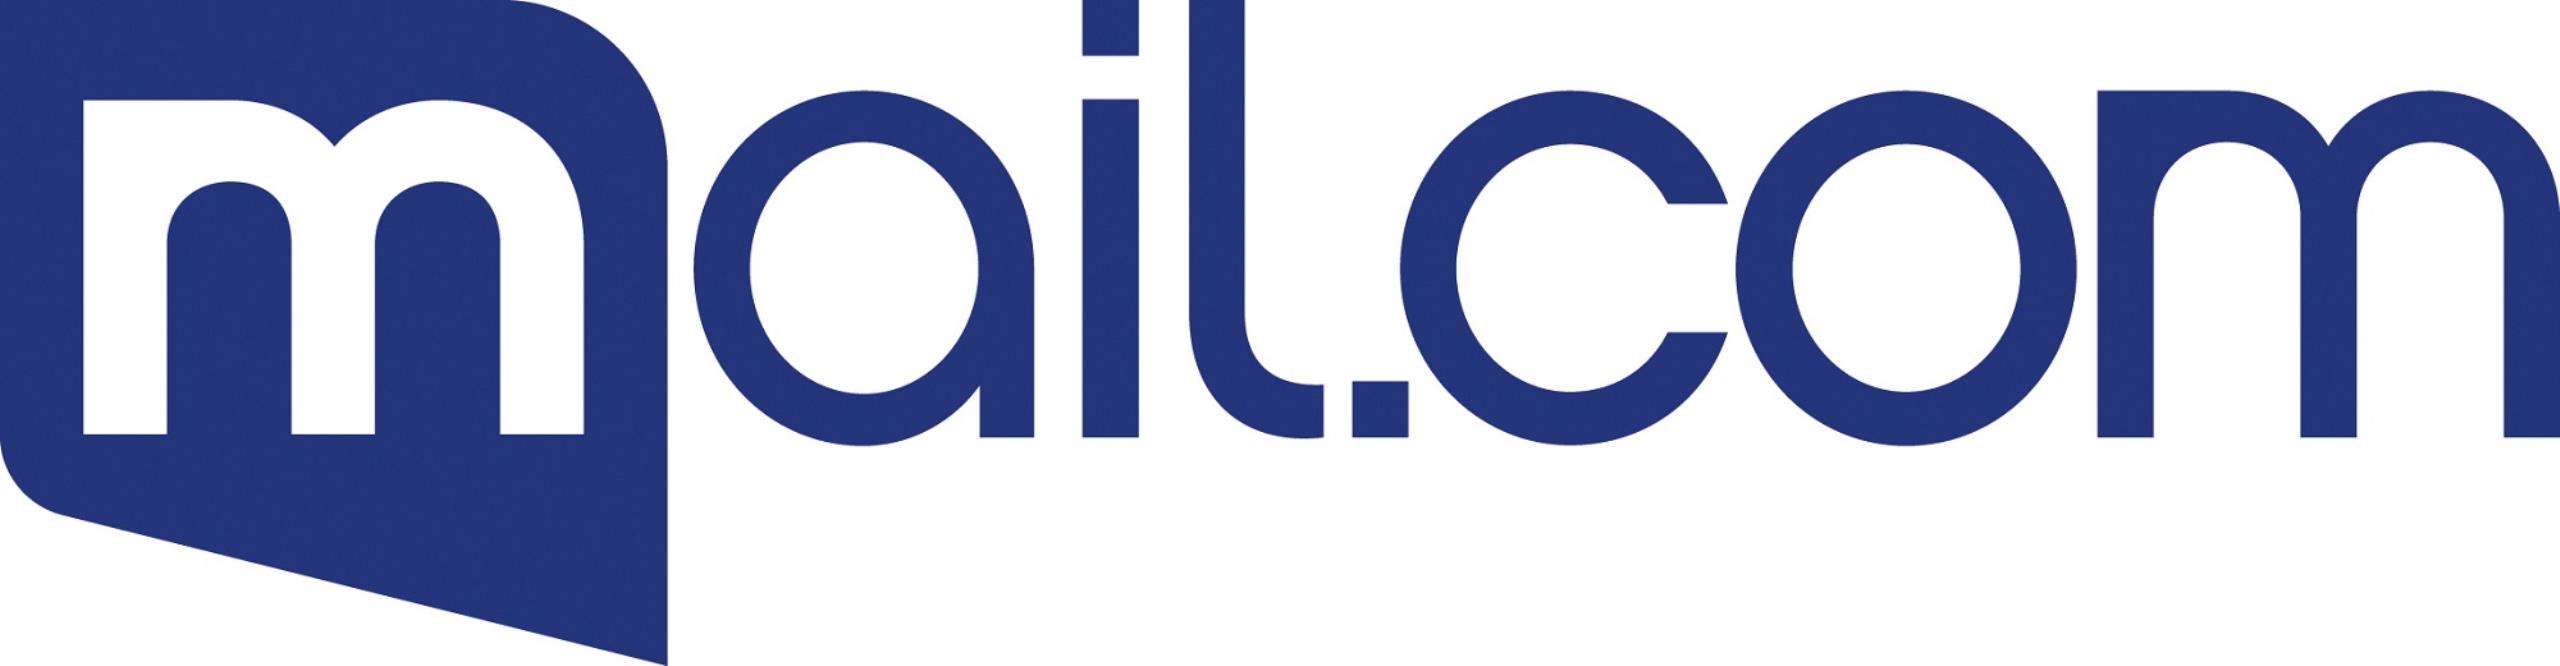 1&1 Mail & Media, Incorporated Logo